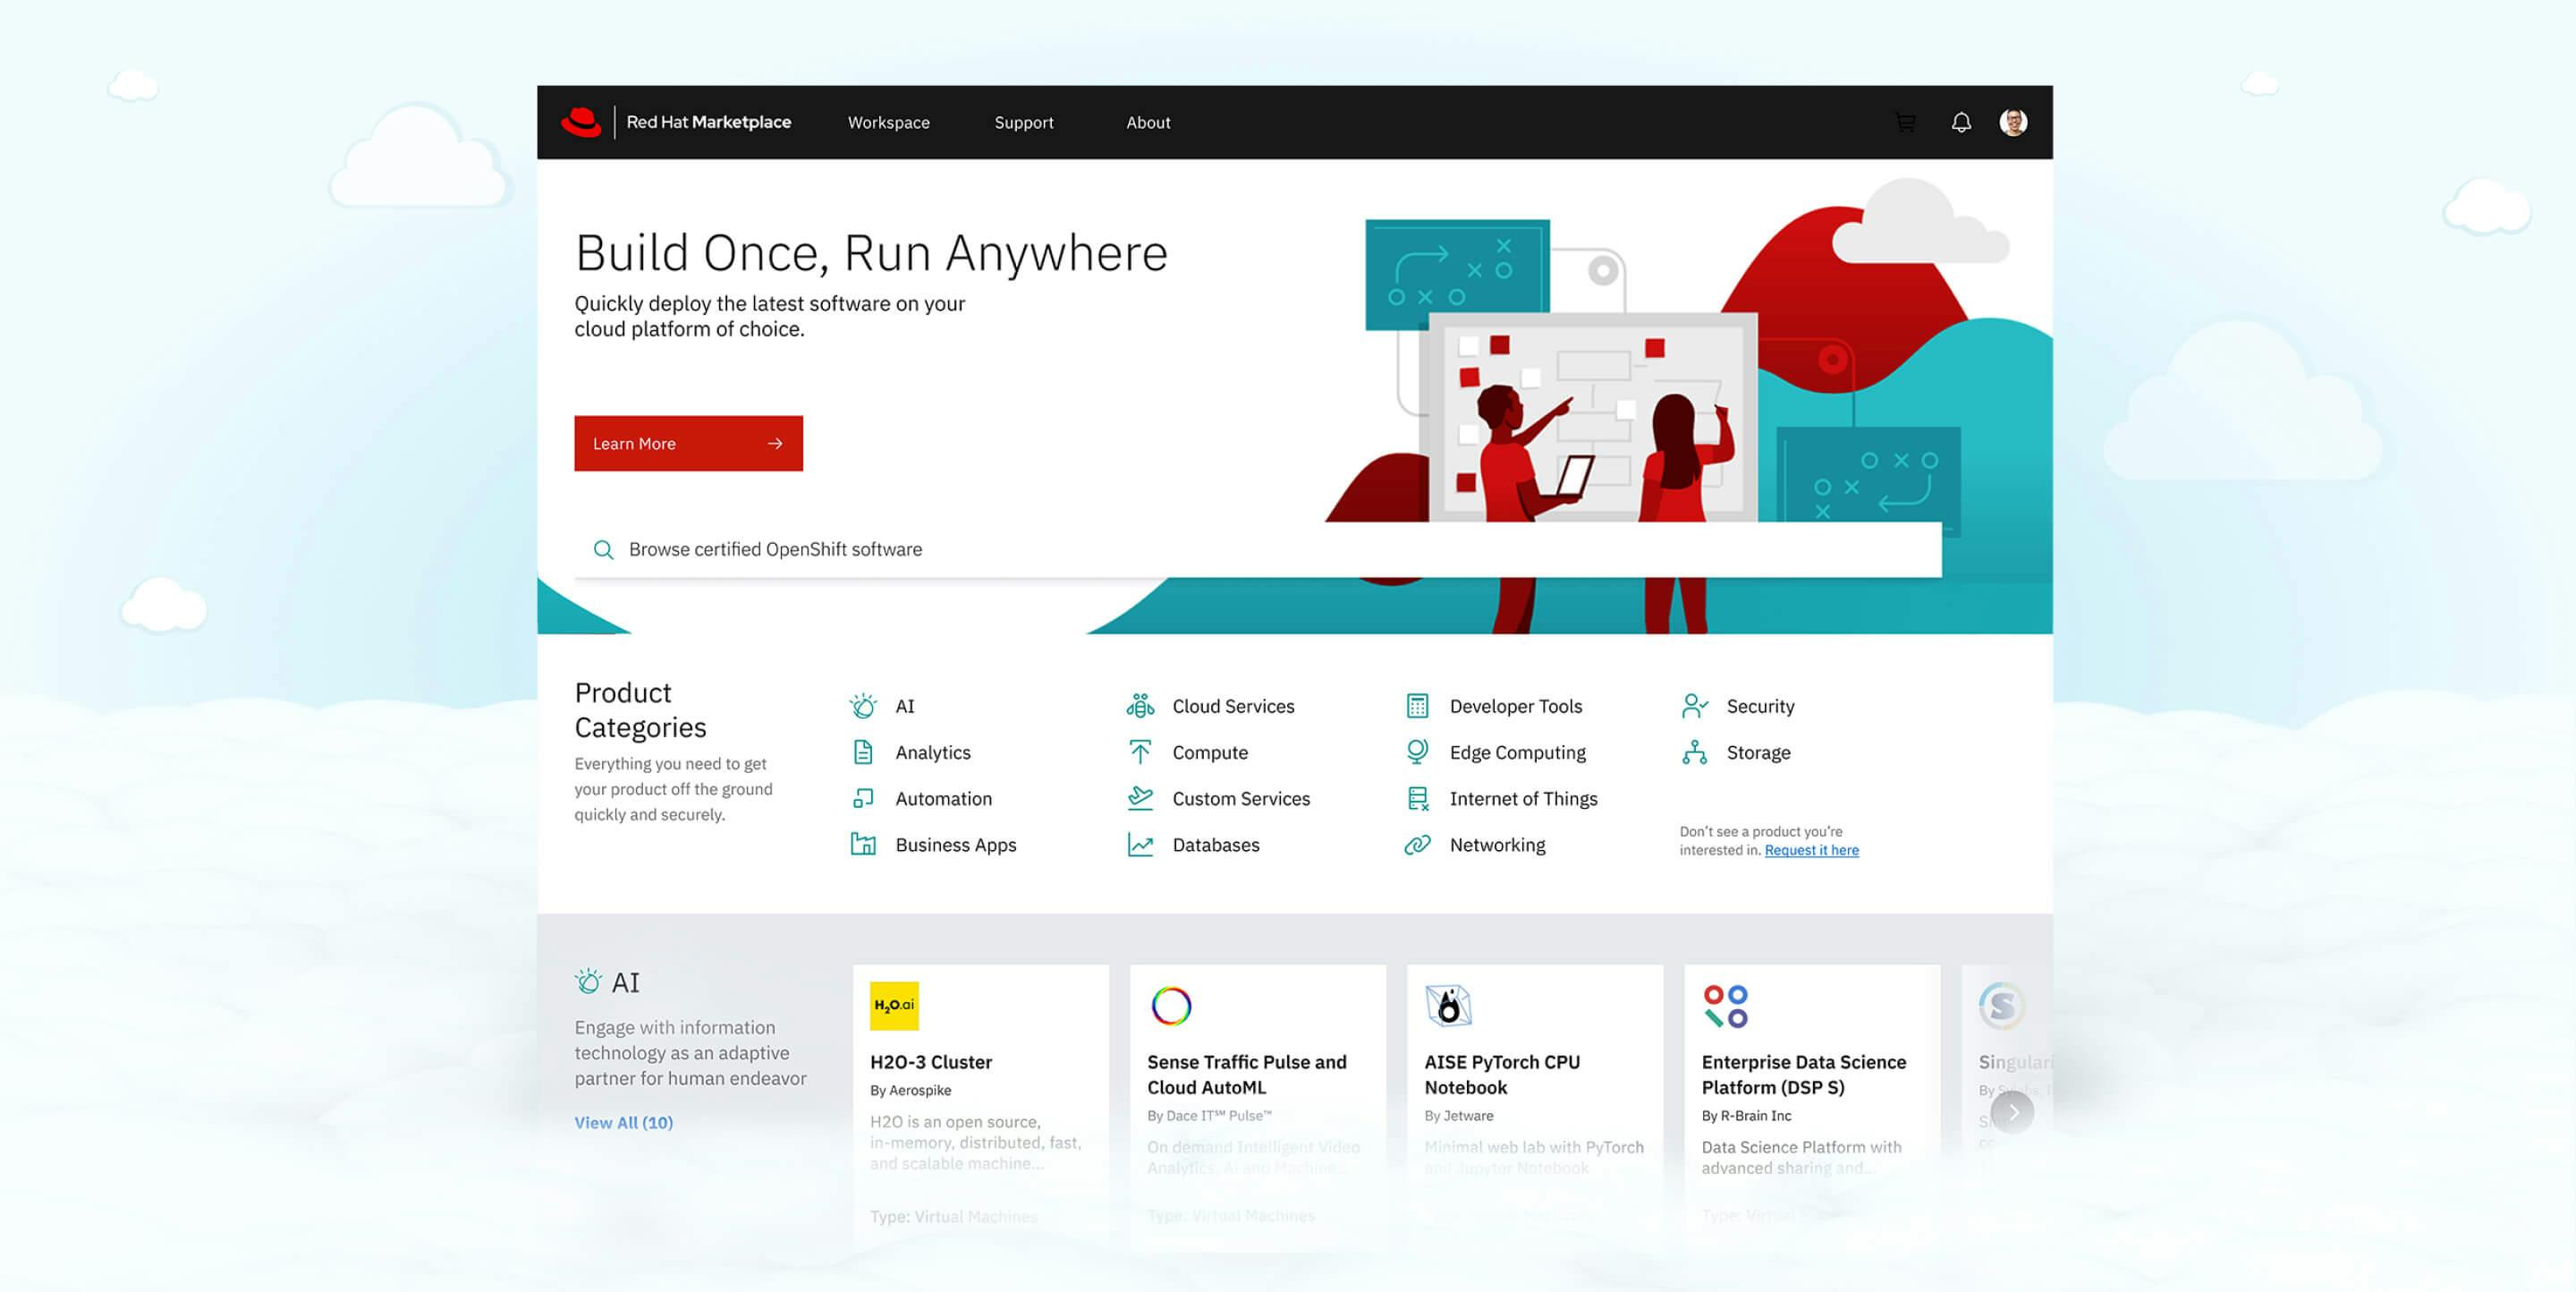 A screen design of IBM Red Hat Marketplace home page